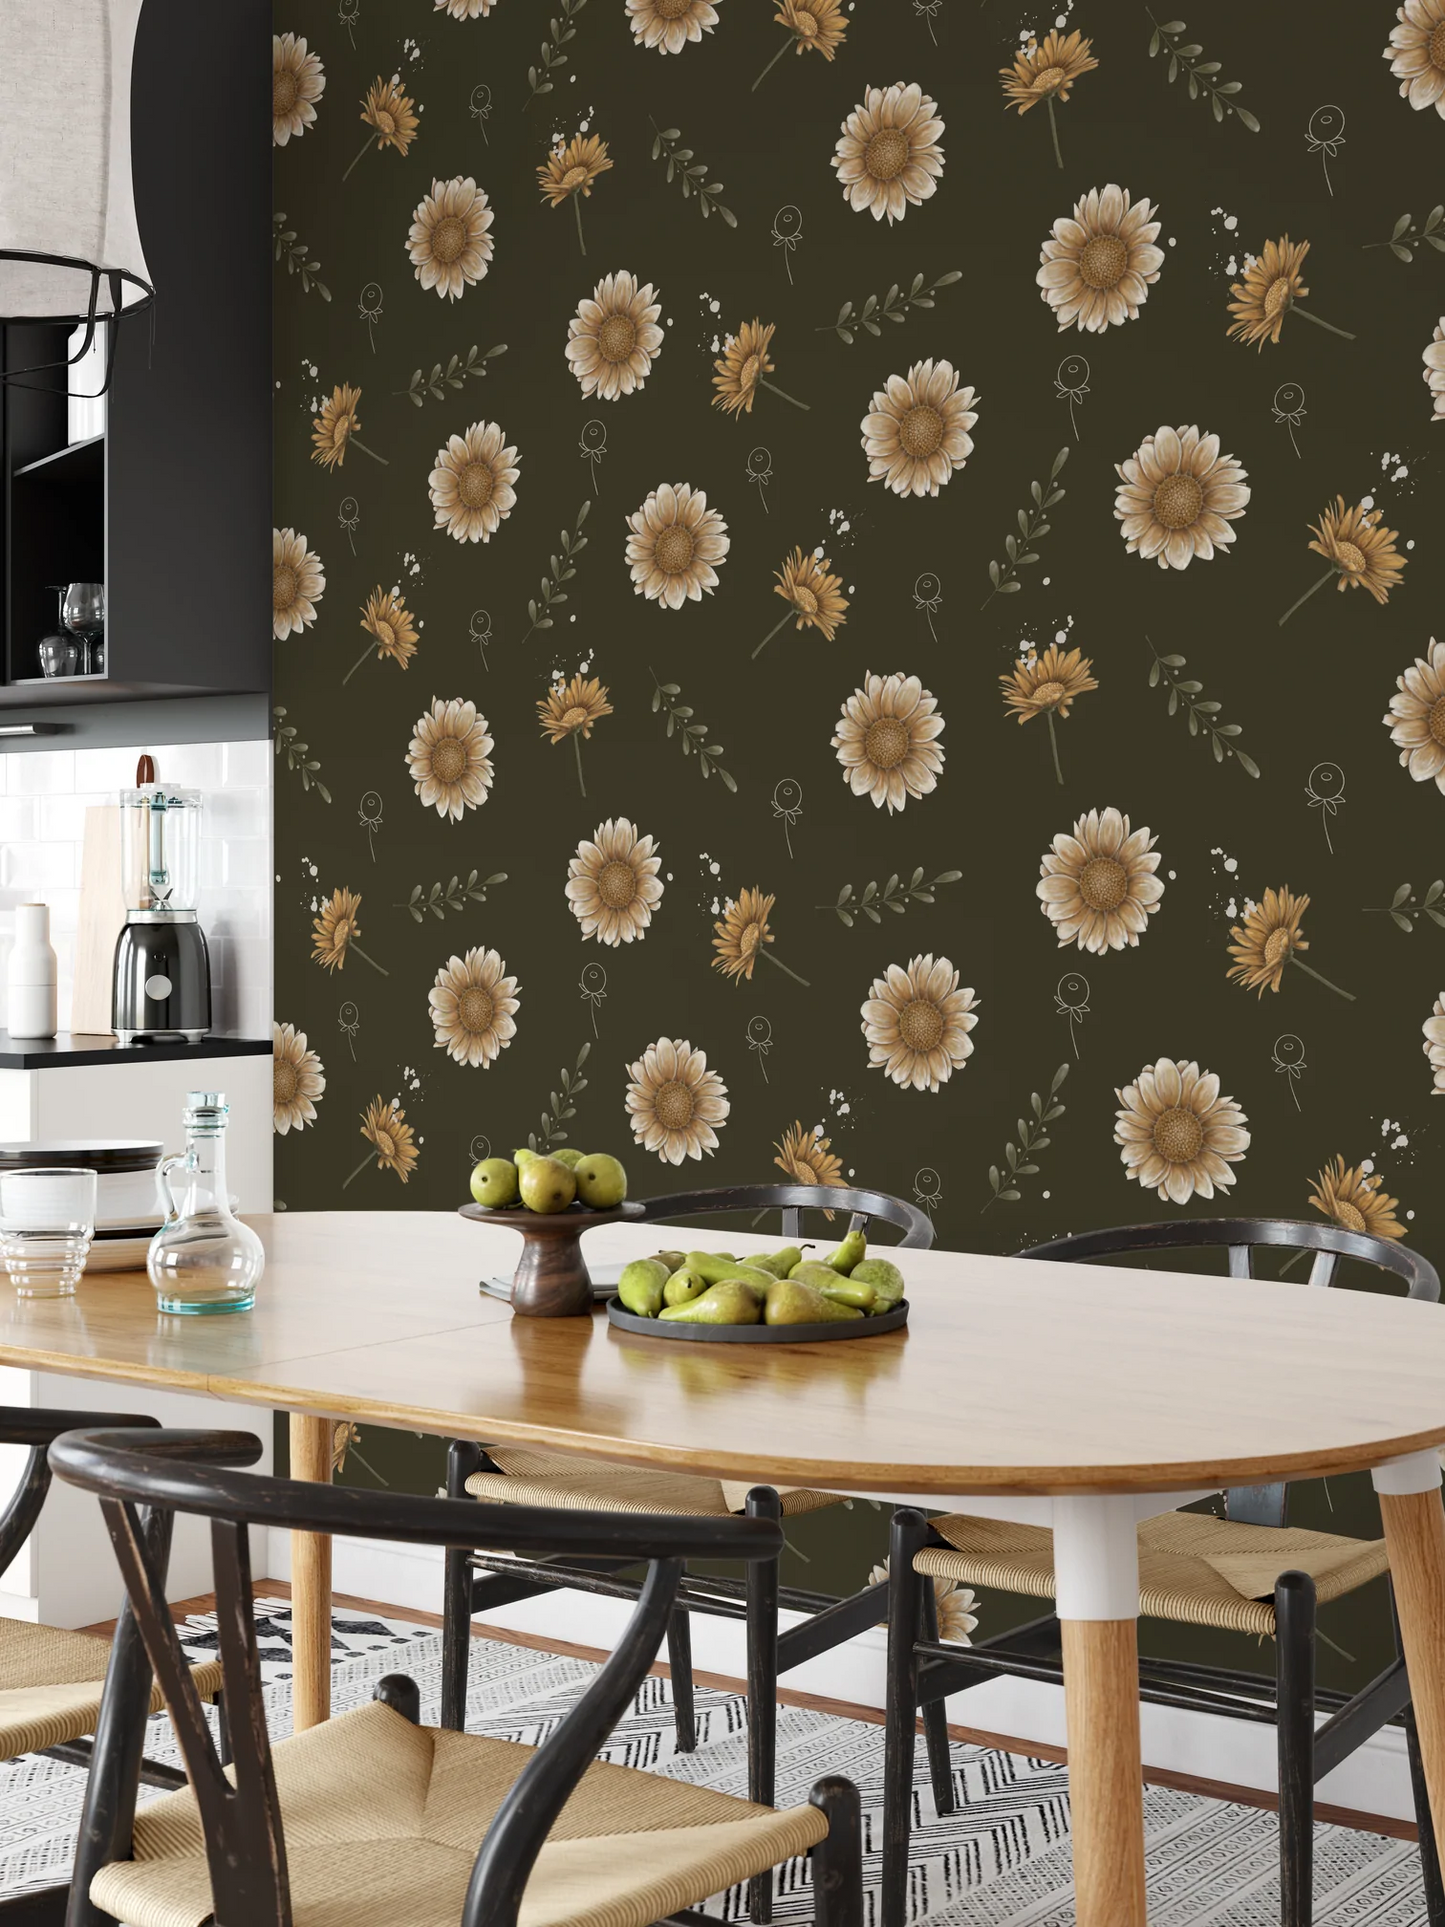 Eco-friendly wallpaper made in Montreal - Apesenteur